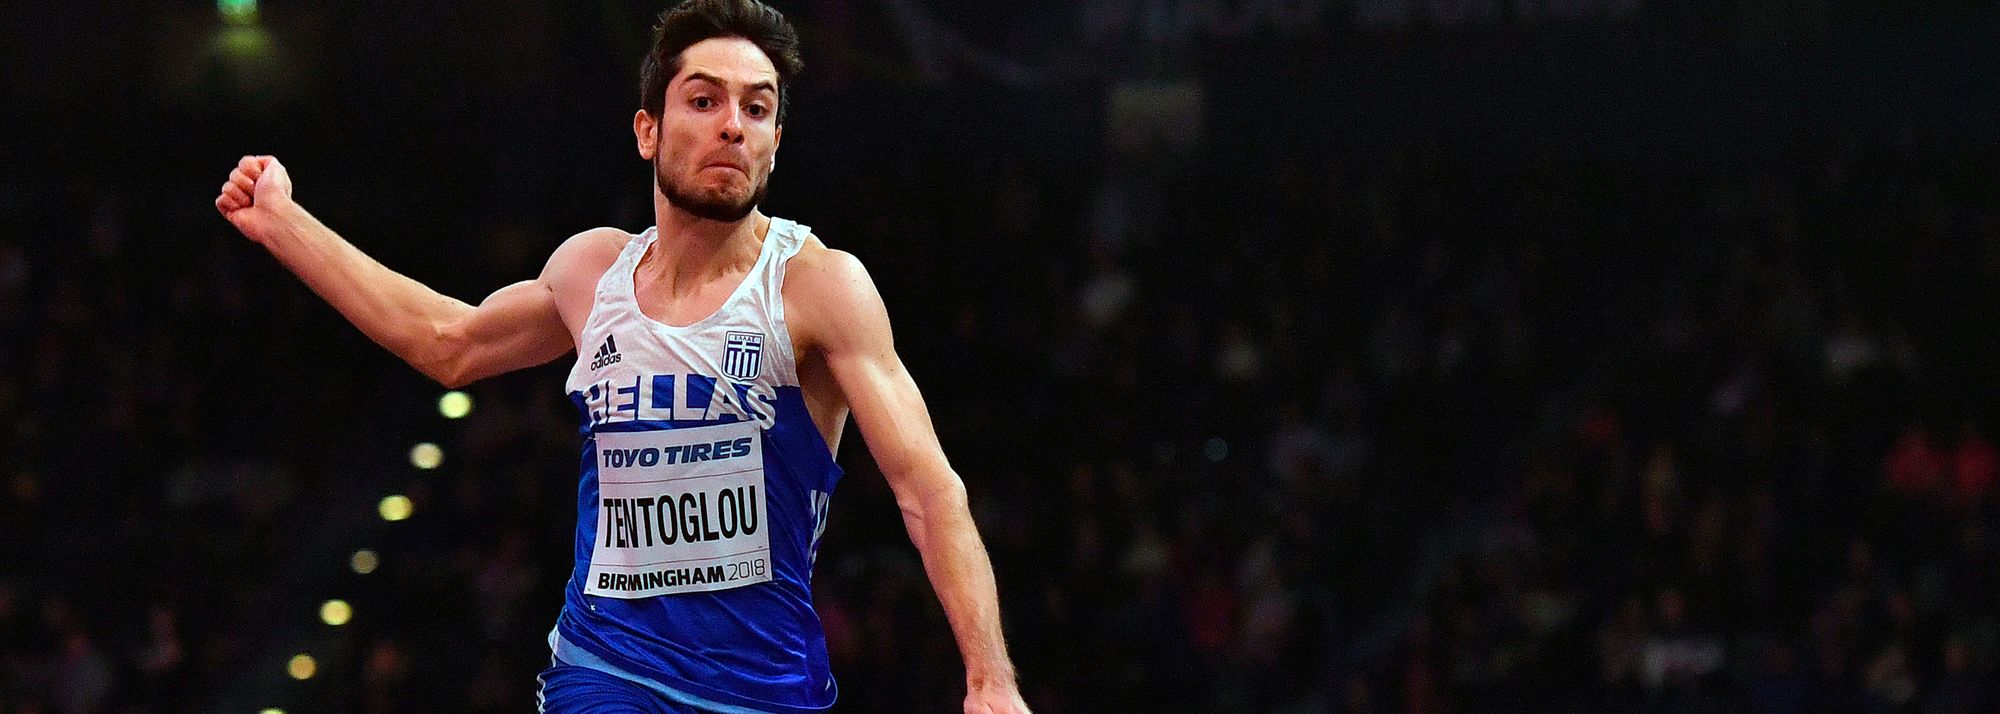 World No.1 long jumper wants to win first world indoor title